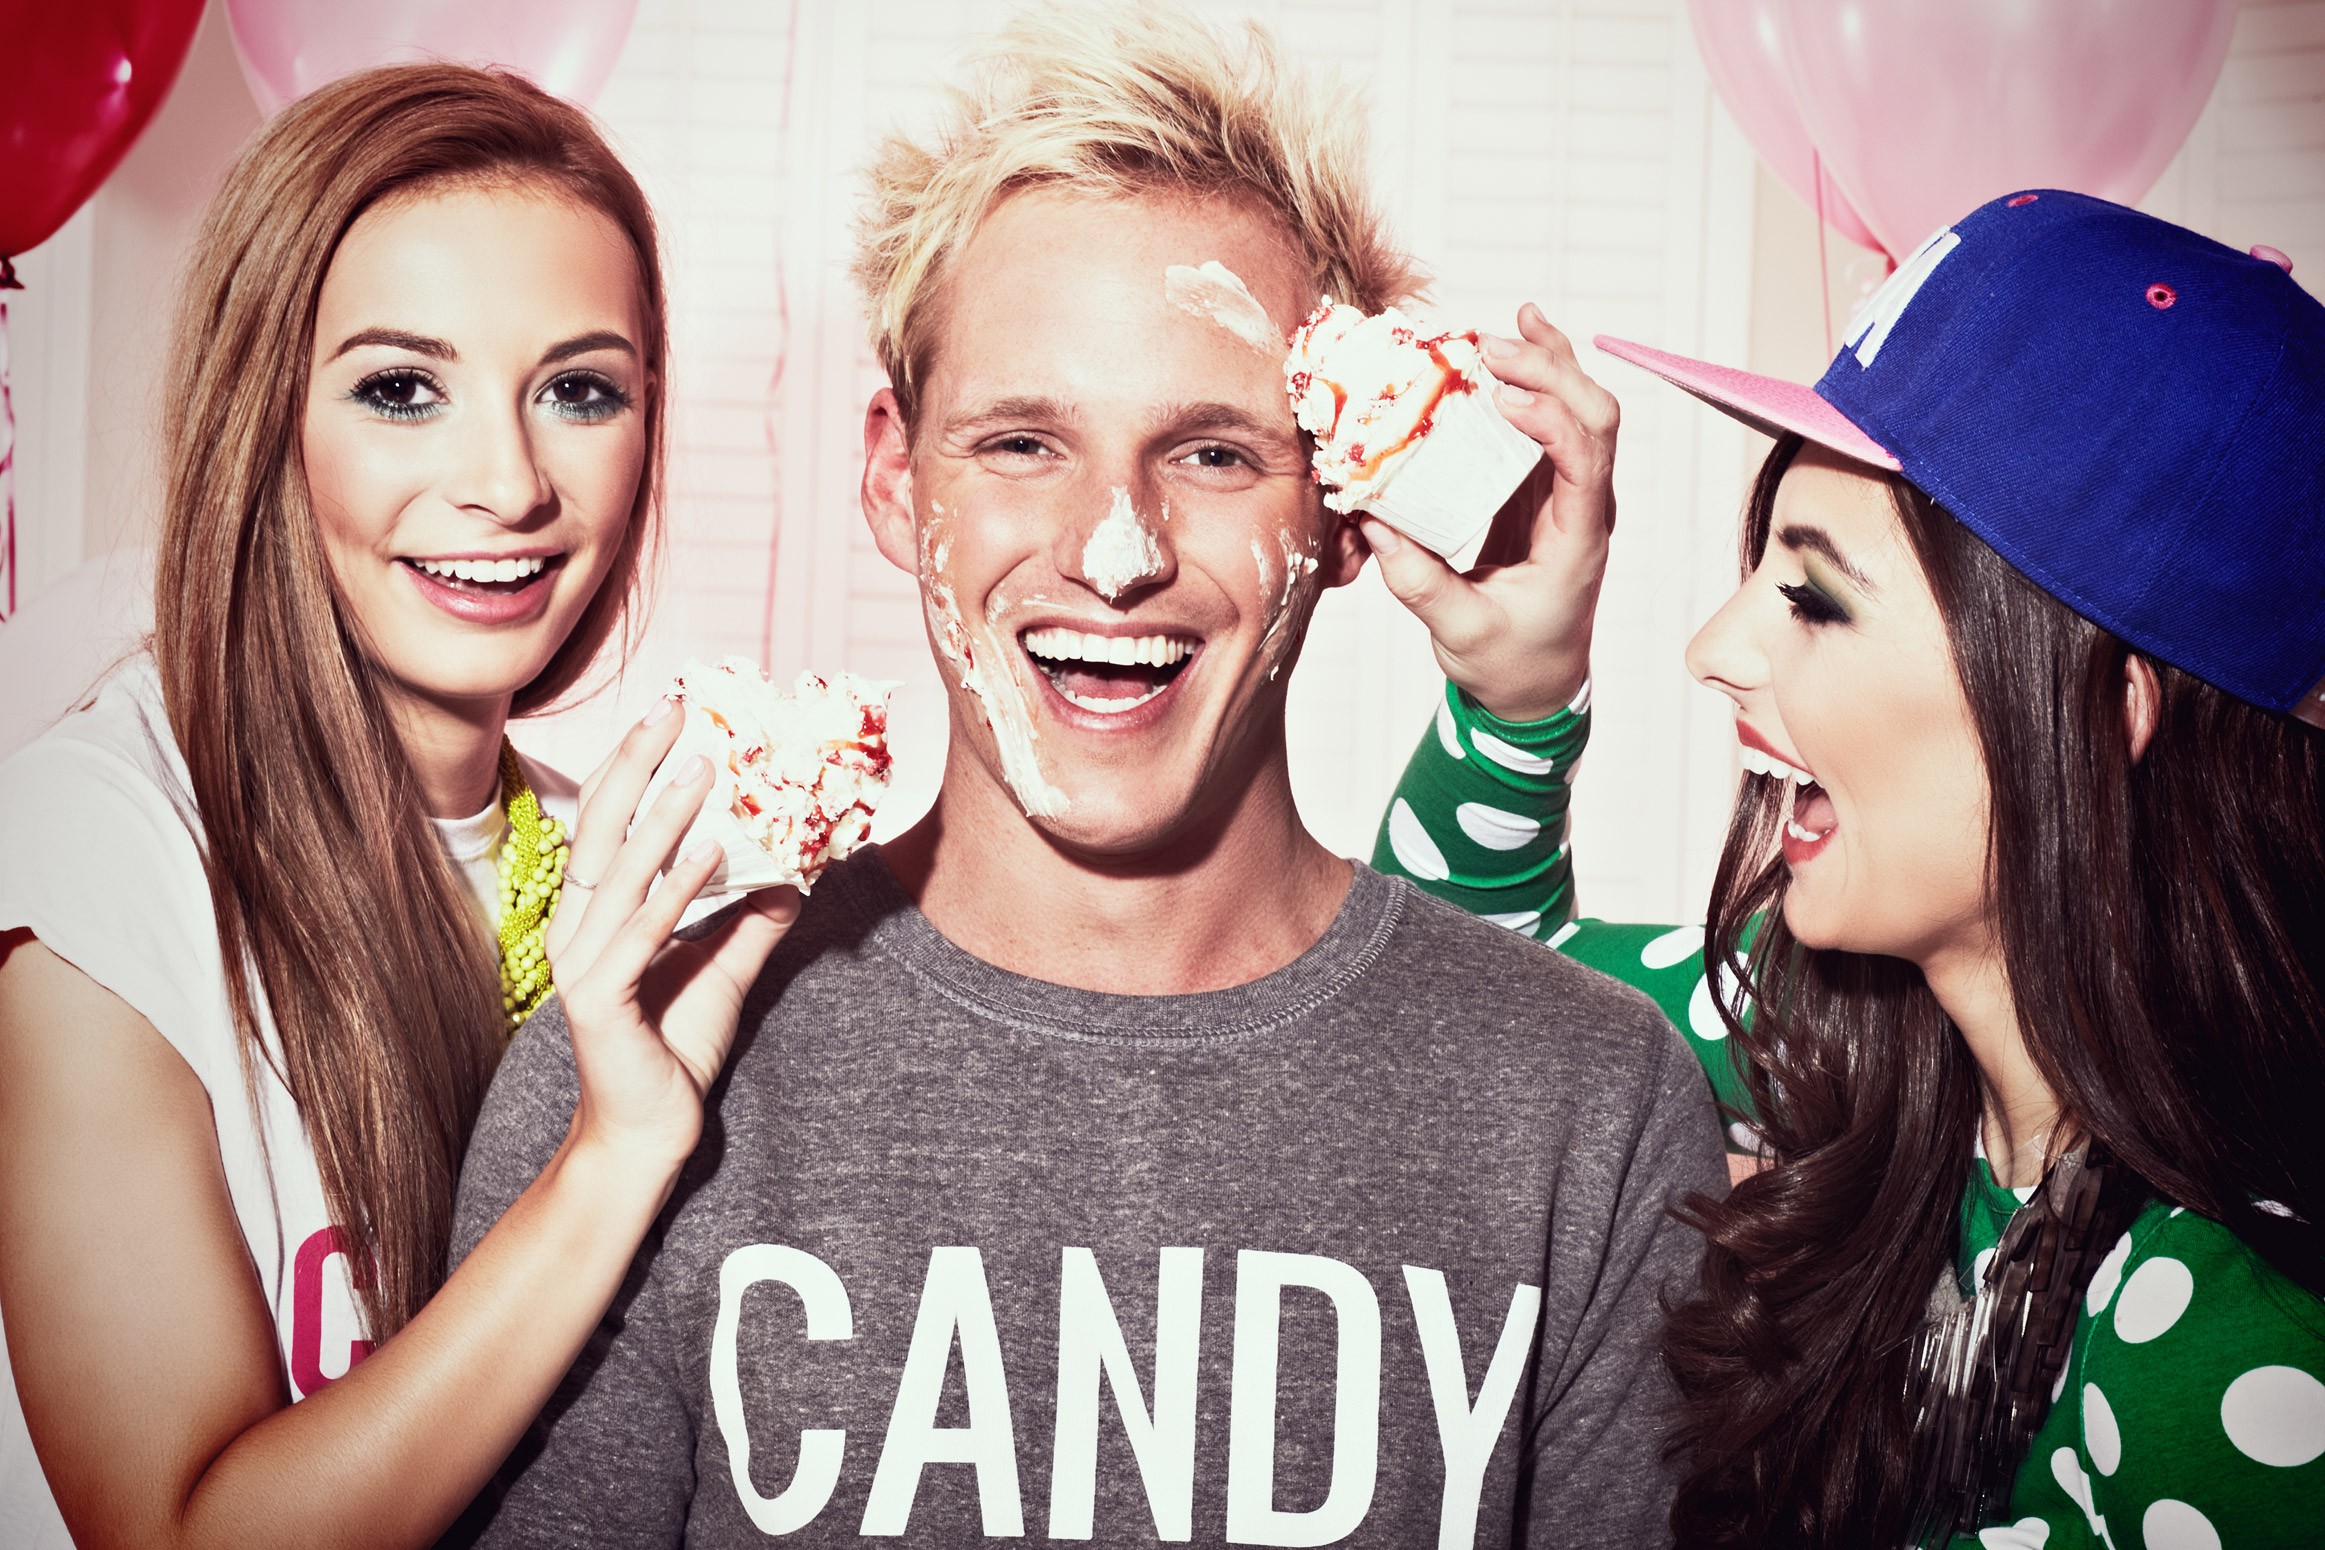 jamie-laing-made-in-chelsea-candy-kittens-ruth-rose-london-photoshoot-fashion-brand-celebrity-photographer-10